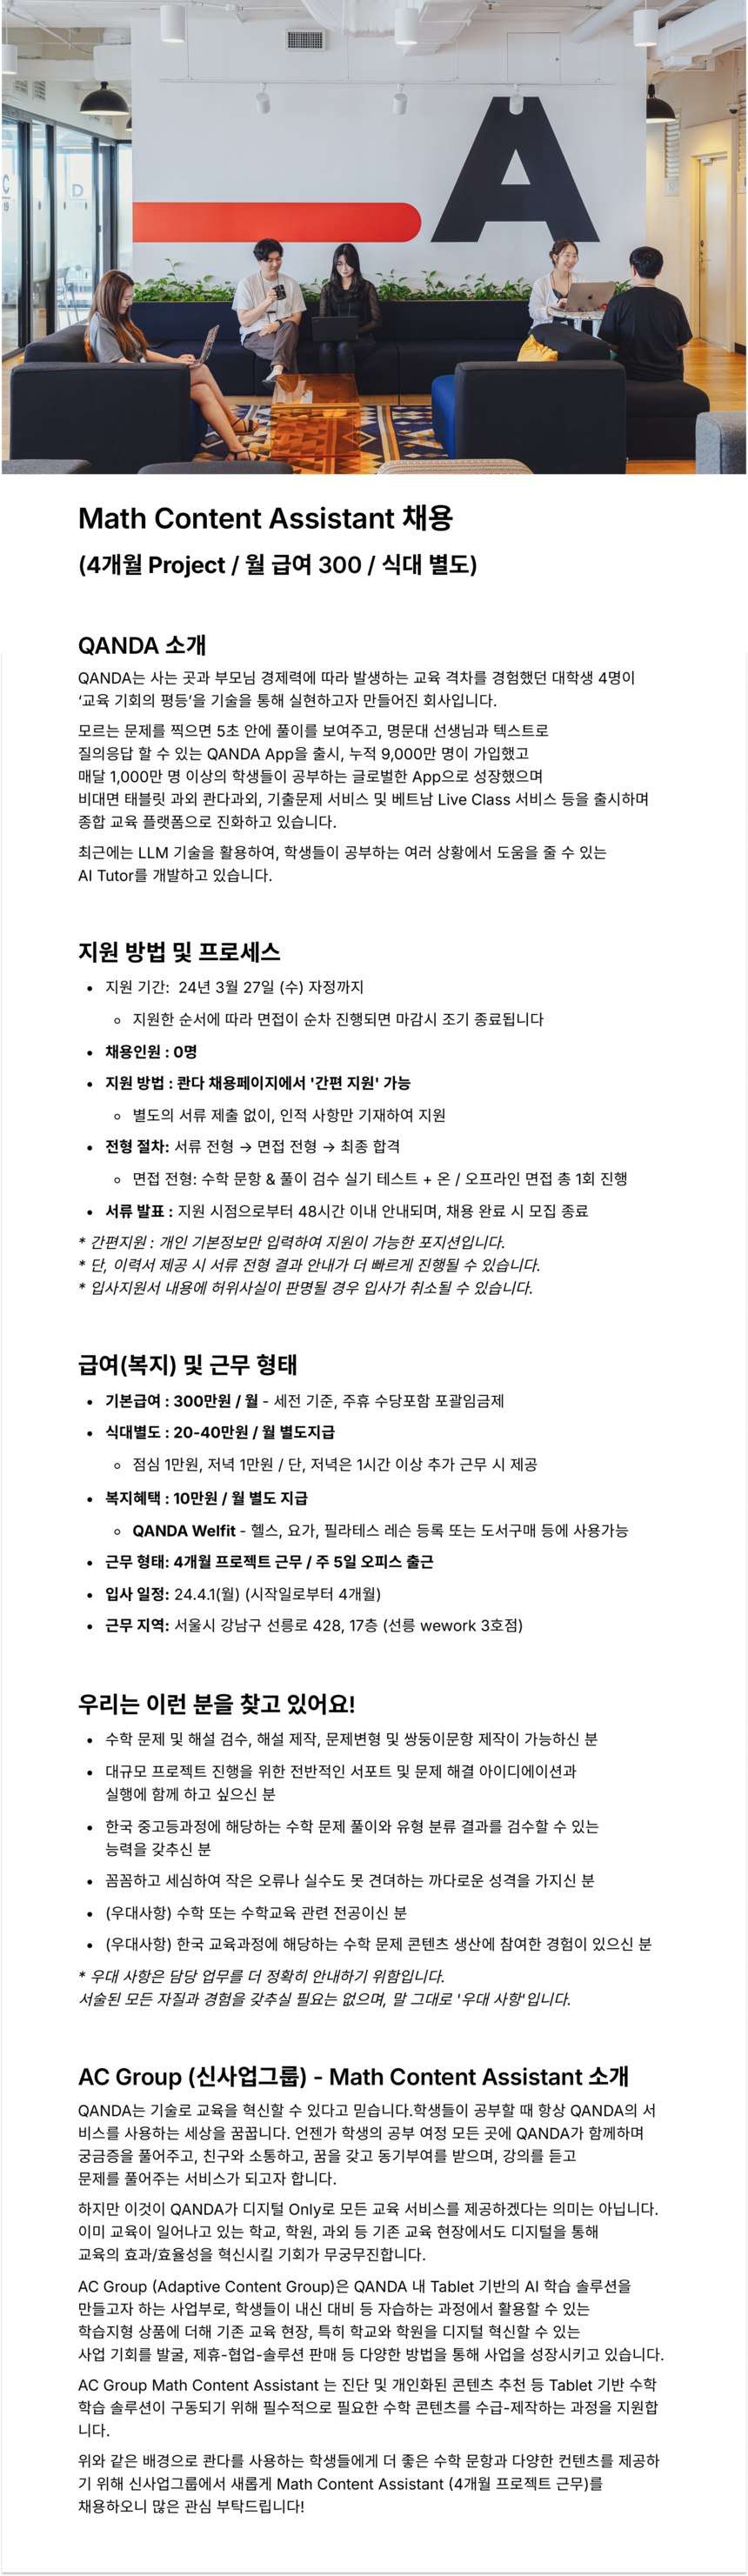 Math Content Assistant (4개월 Project)